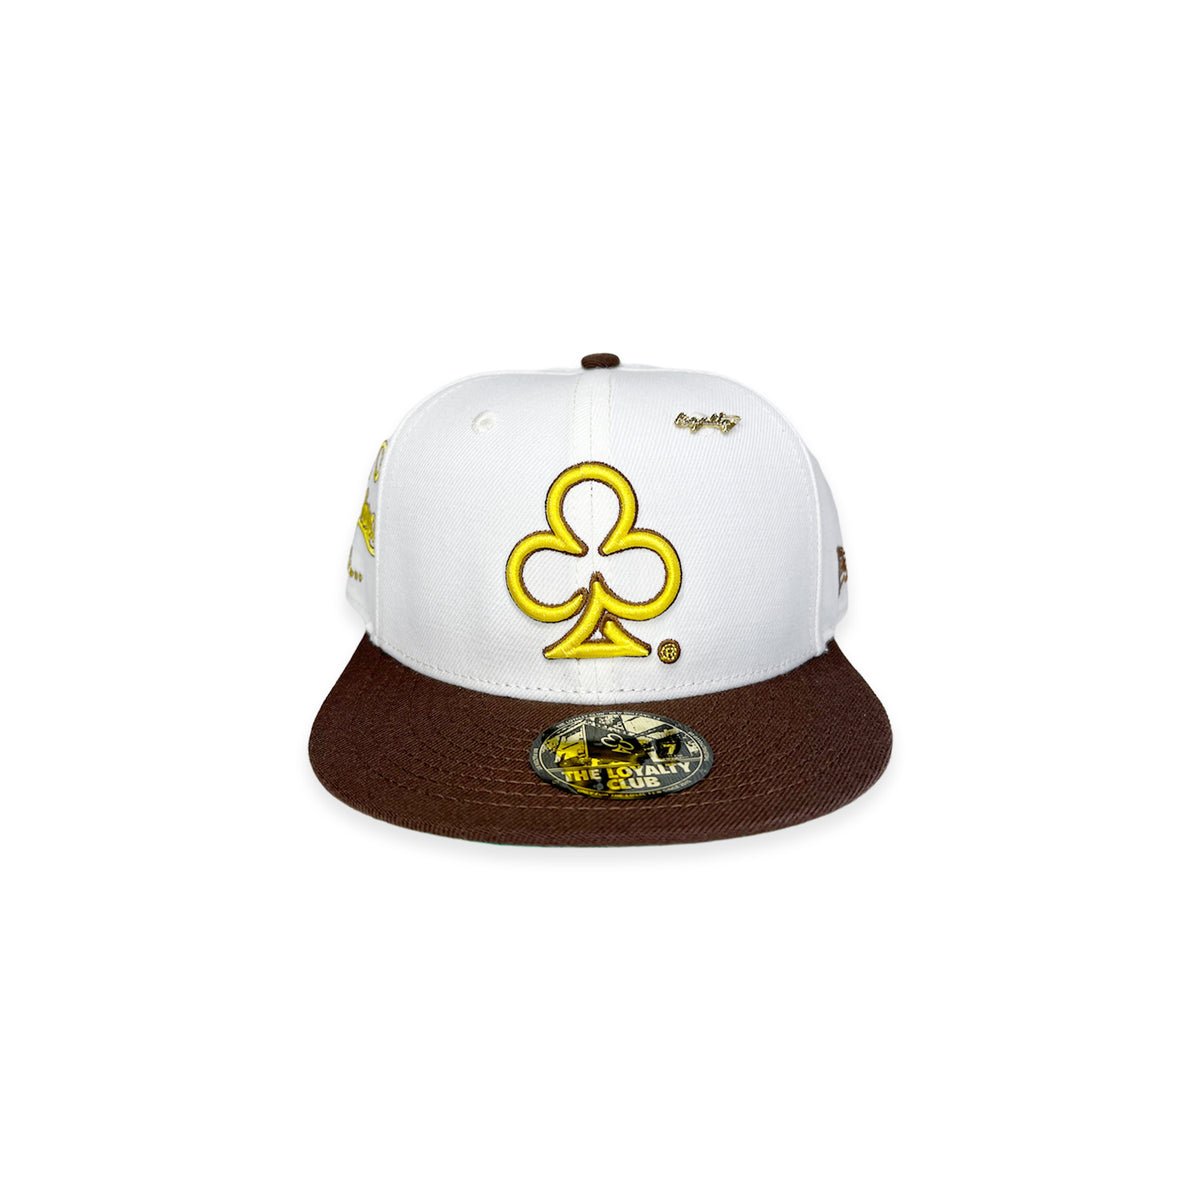 ♣️® LOGO FITTED HAT (CREAM/BROWN) – The Loyalty Club